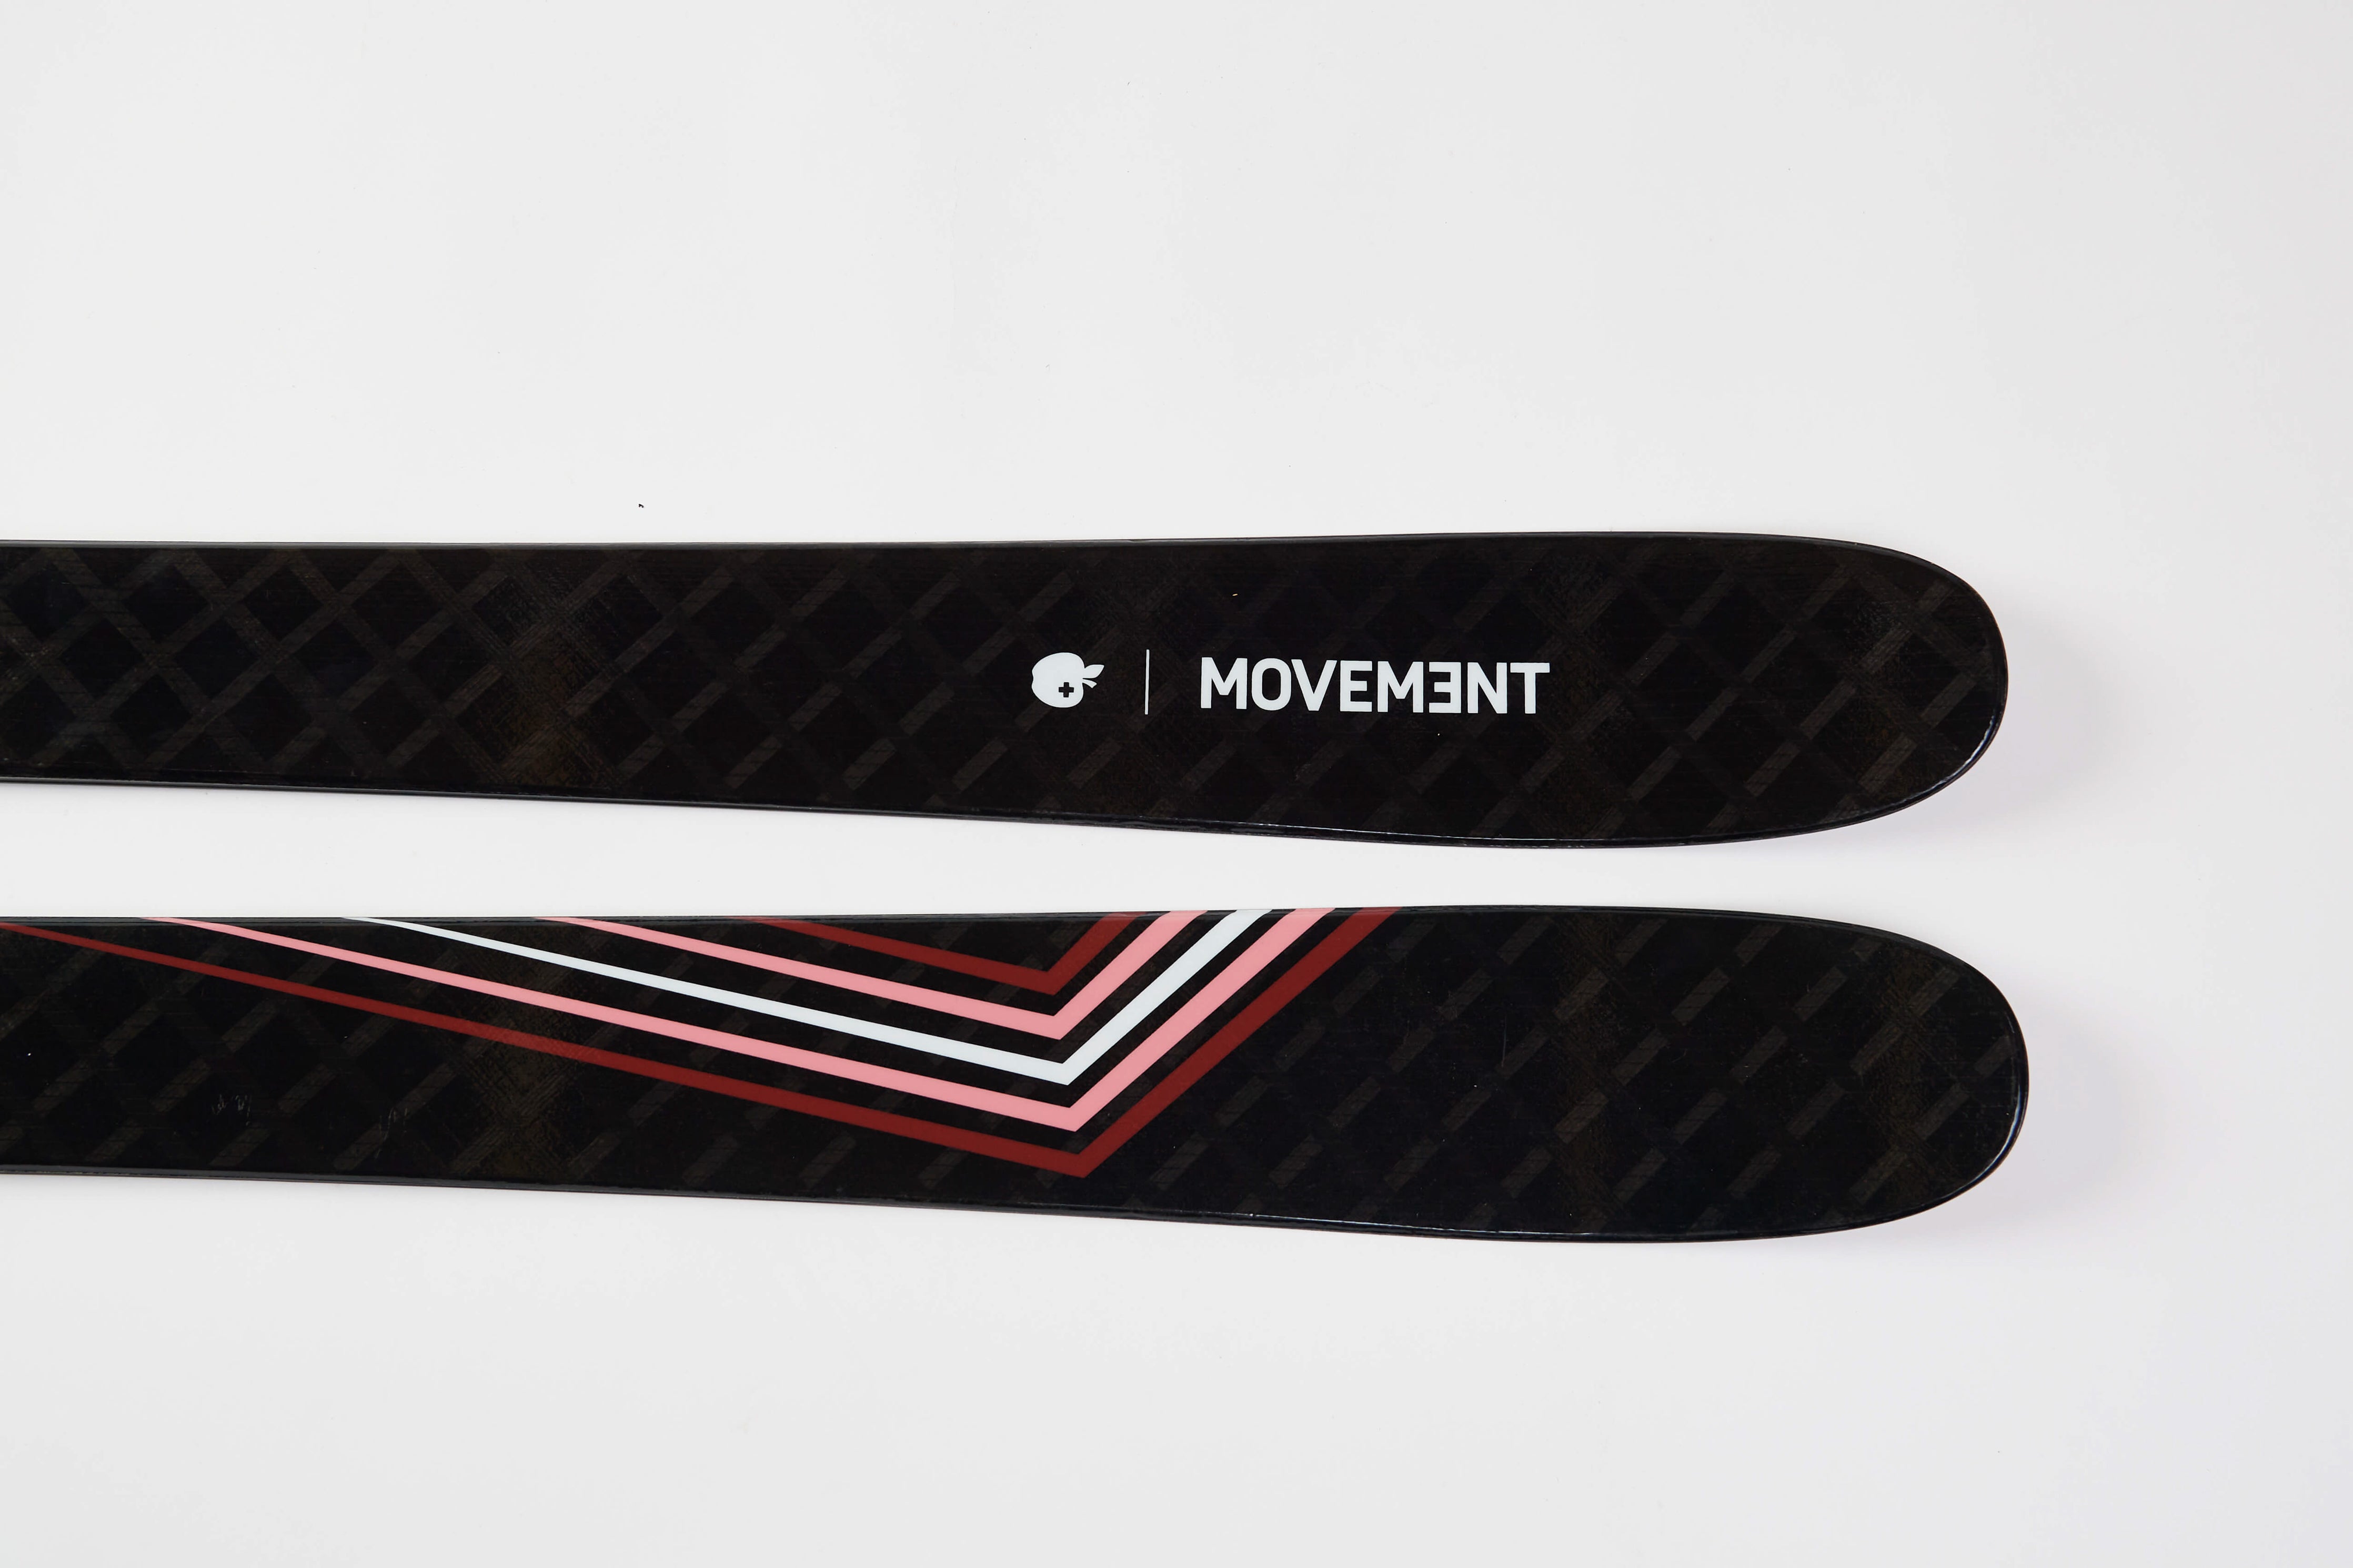 Unleash your touring potential with Movement's Alp Tracks 90W skis.